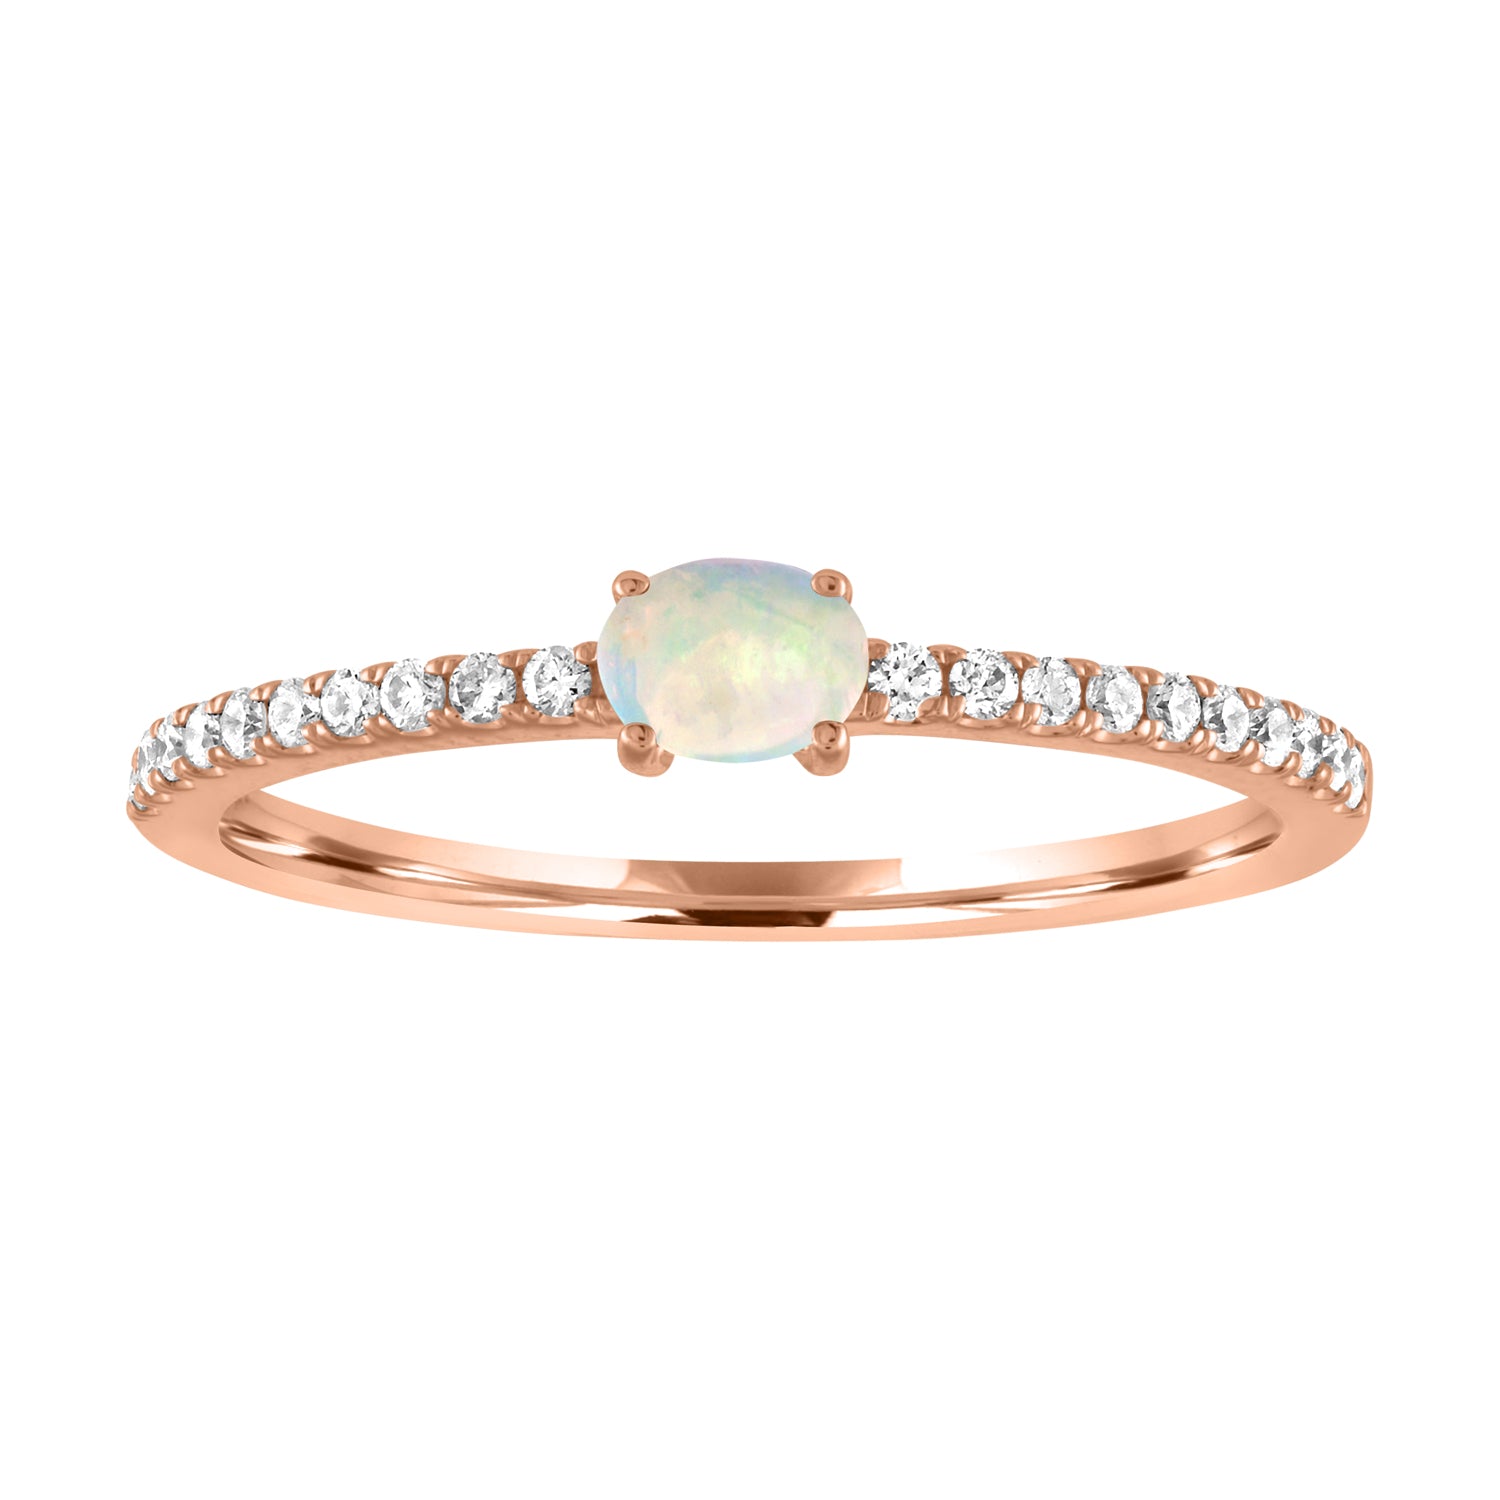 Rose gold skinny band with an oval opal in the center and round diamonds along the shank.